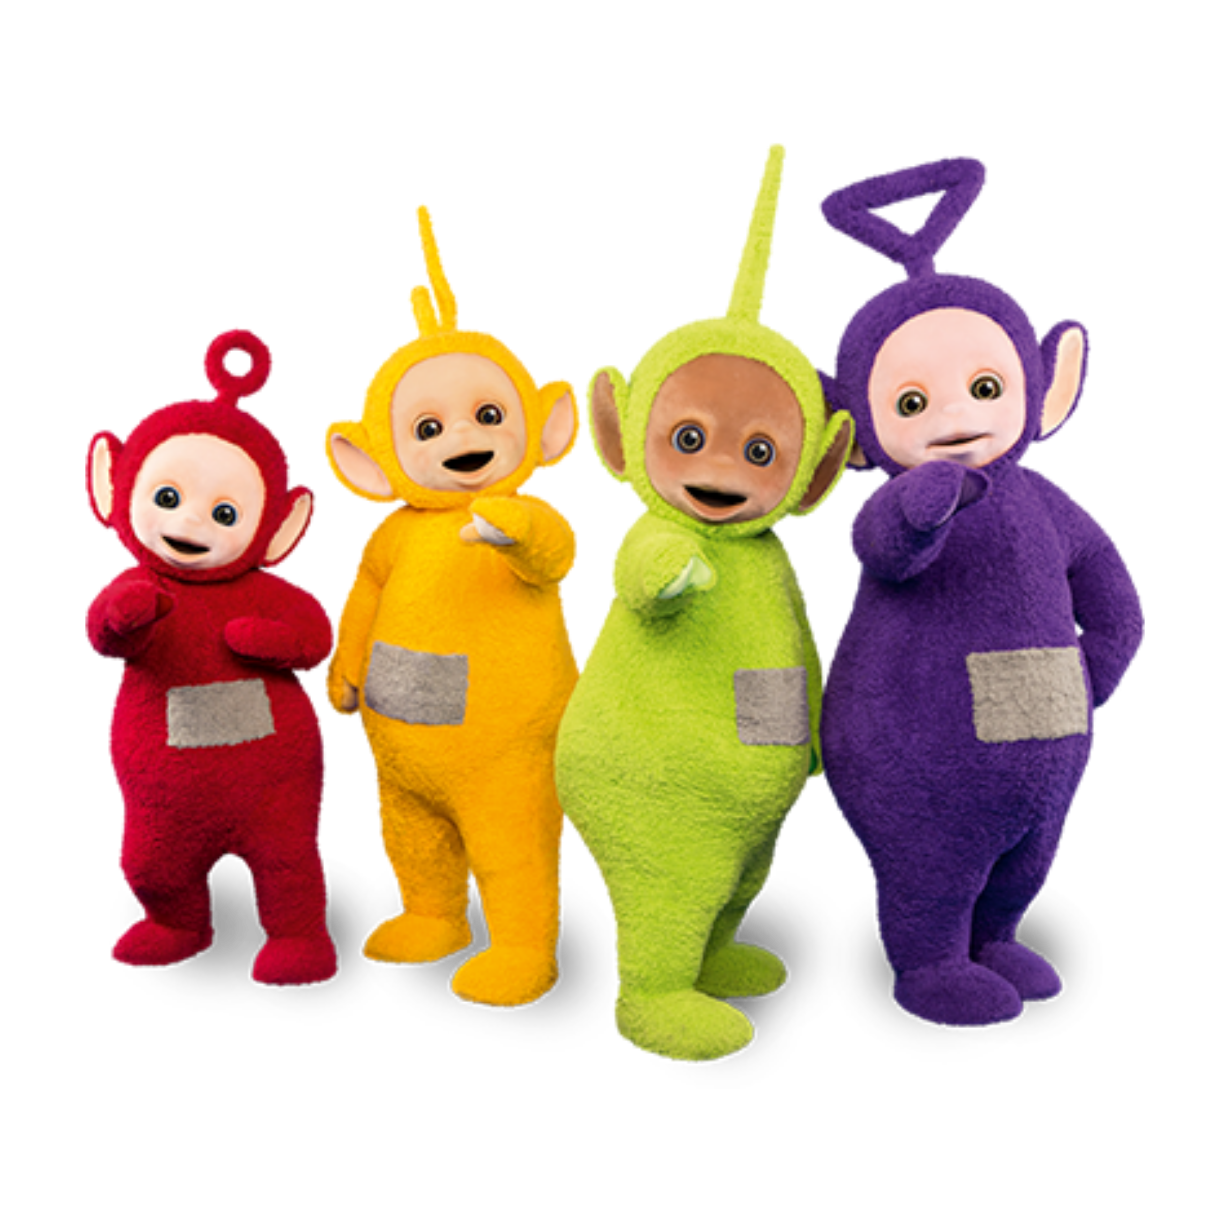 This visual is about teletubbies freetoedit #teletubbies.